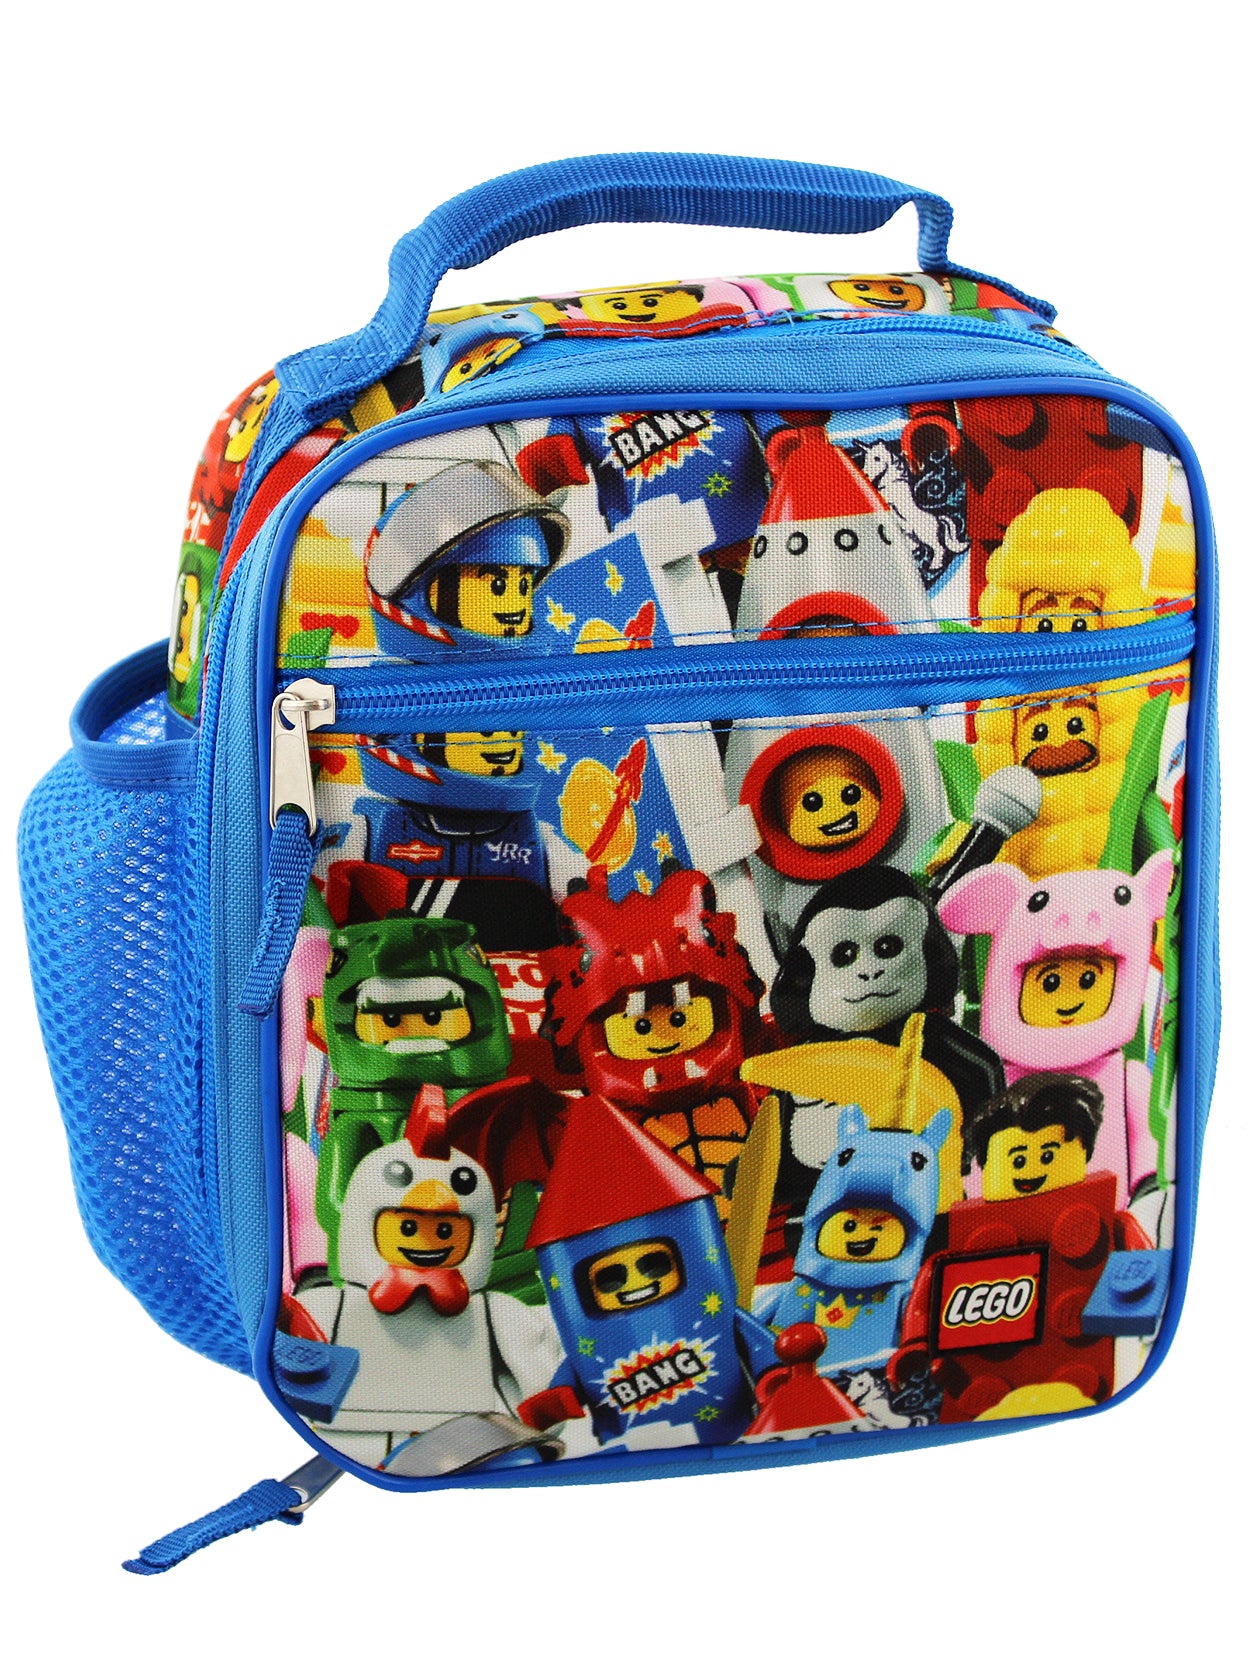  LEGO Kids City Police and Fire Lunch Box, Insulated Soft  Reusable Lunch Bag Meal Container for Boys and Girls, Perfect for School,  or Travel, Meal Tote to Keep Food and Drinks